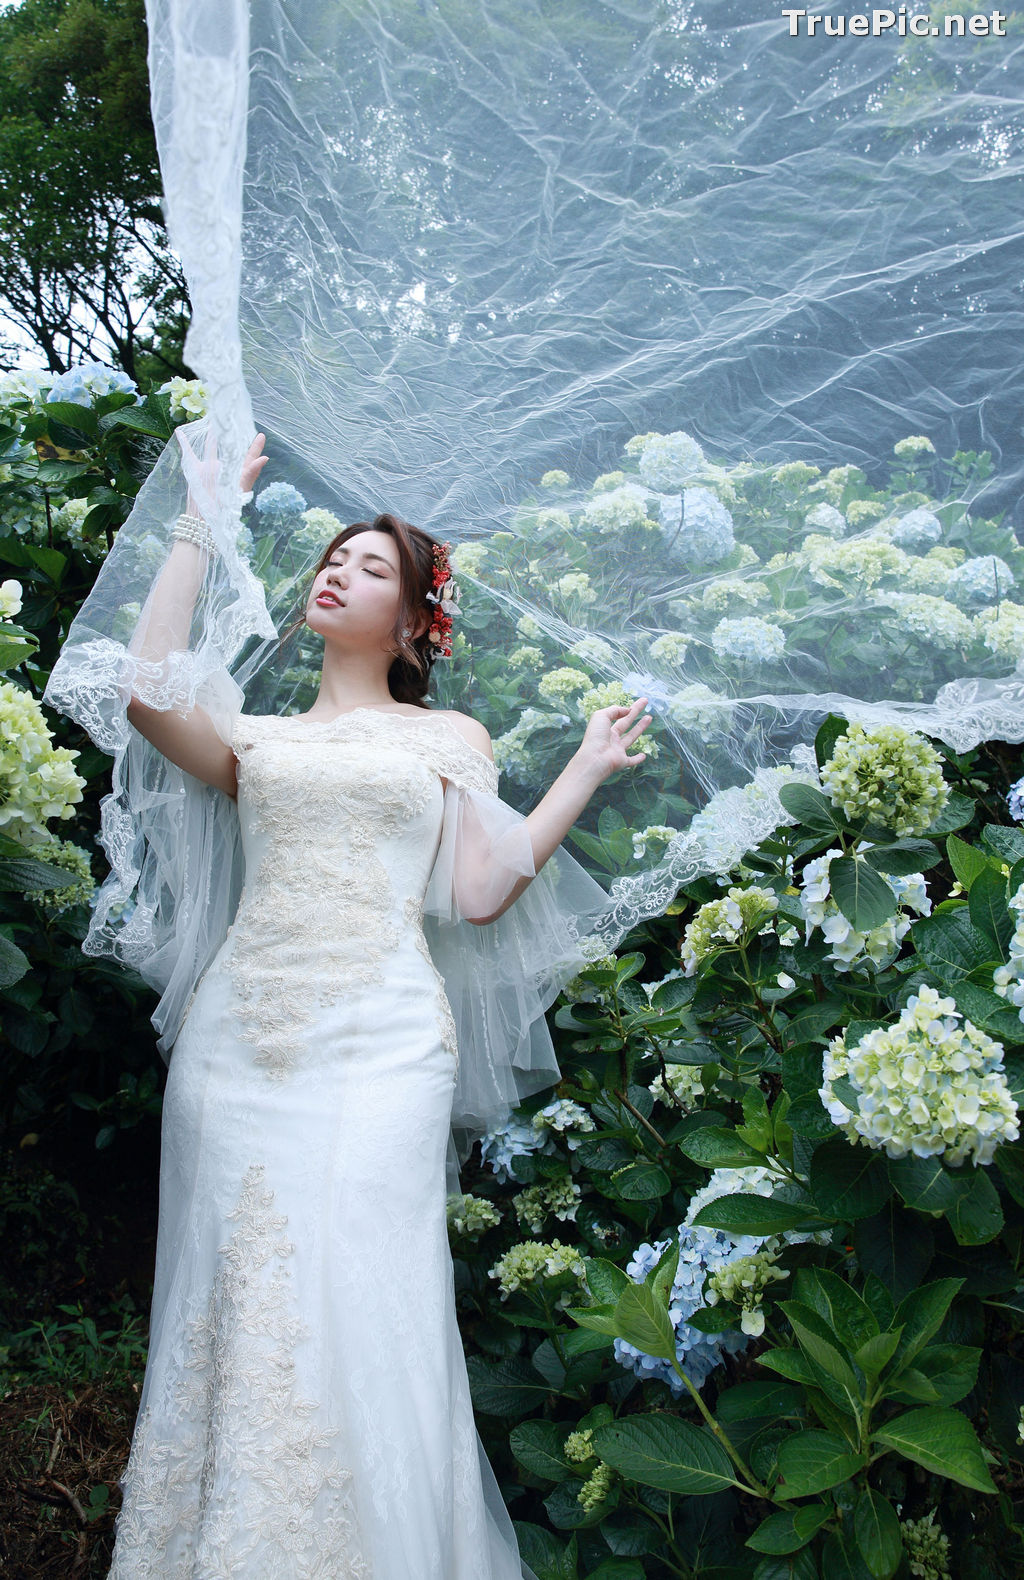 Image Taiwanese Model - 張倫甄 - Beautiful Bride and Hydrangea Flowers - TruePic.net - Picture-27